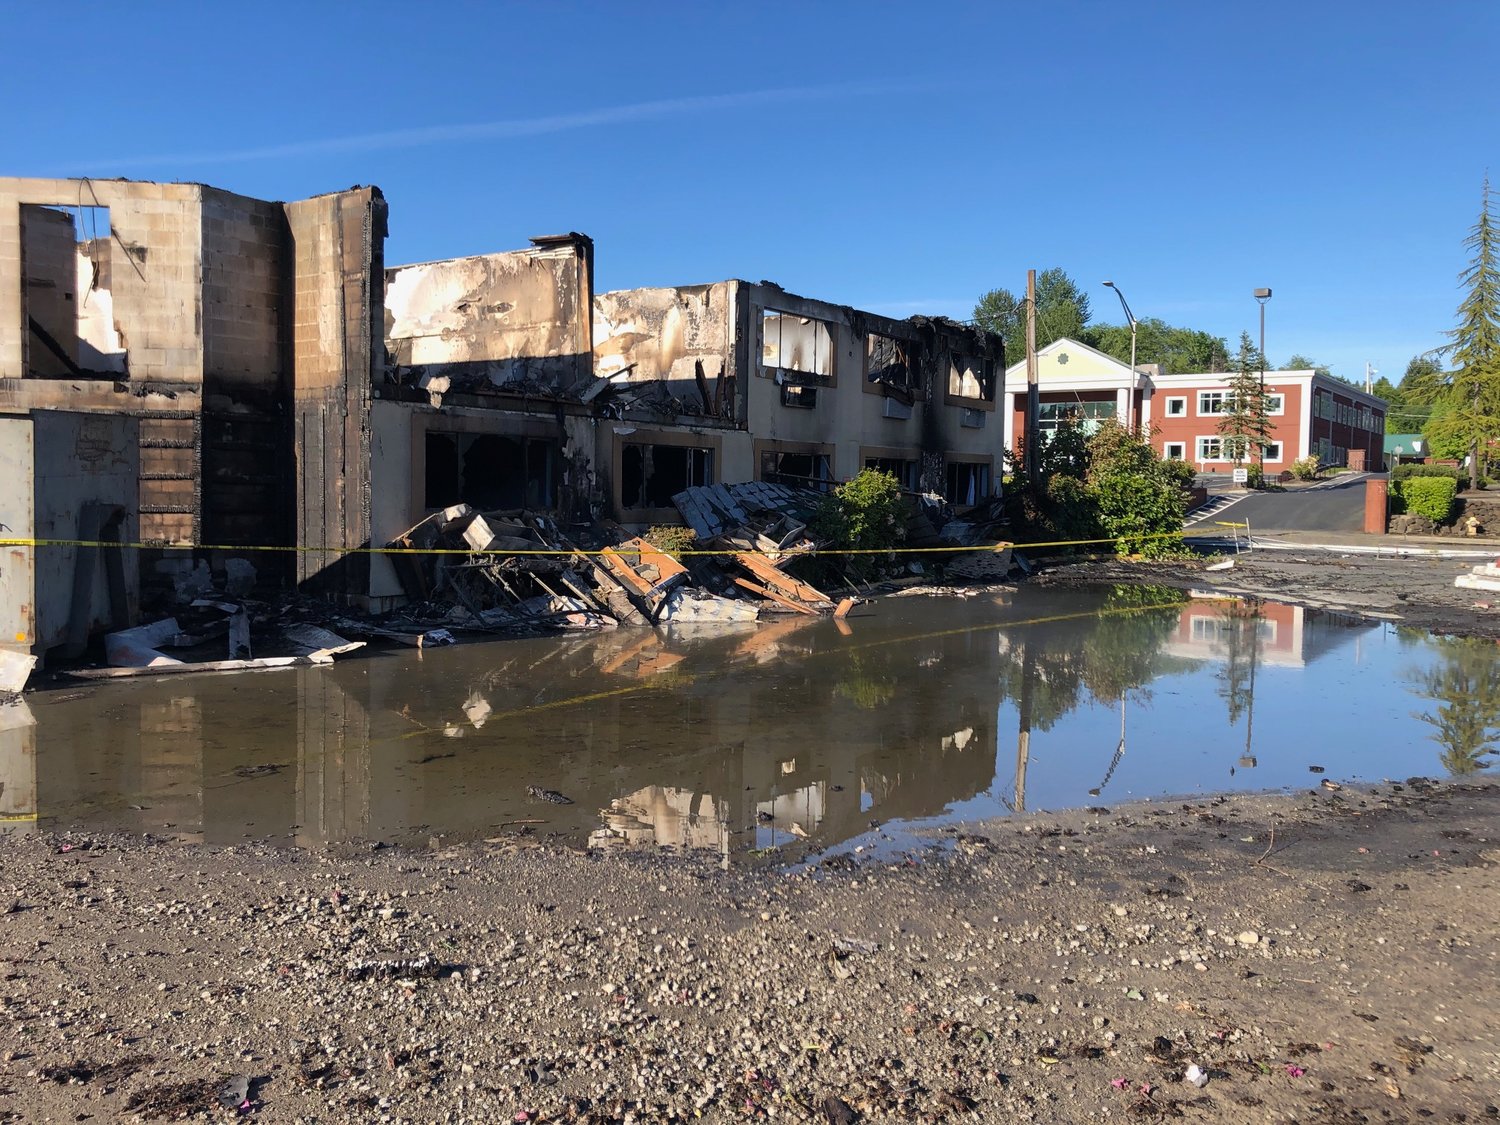 This is another view of the north building at the former Quality Inn at 1211 Quince St. SE in Olympia. The photo was taken Sun., May 30, 2021